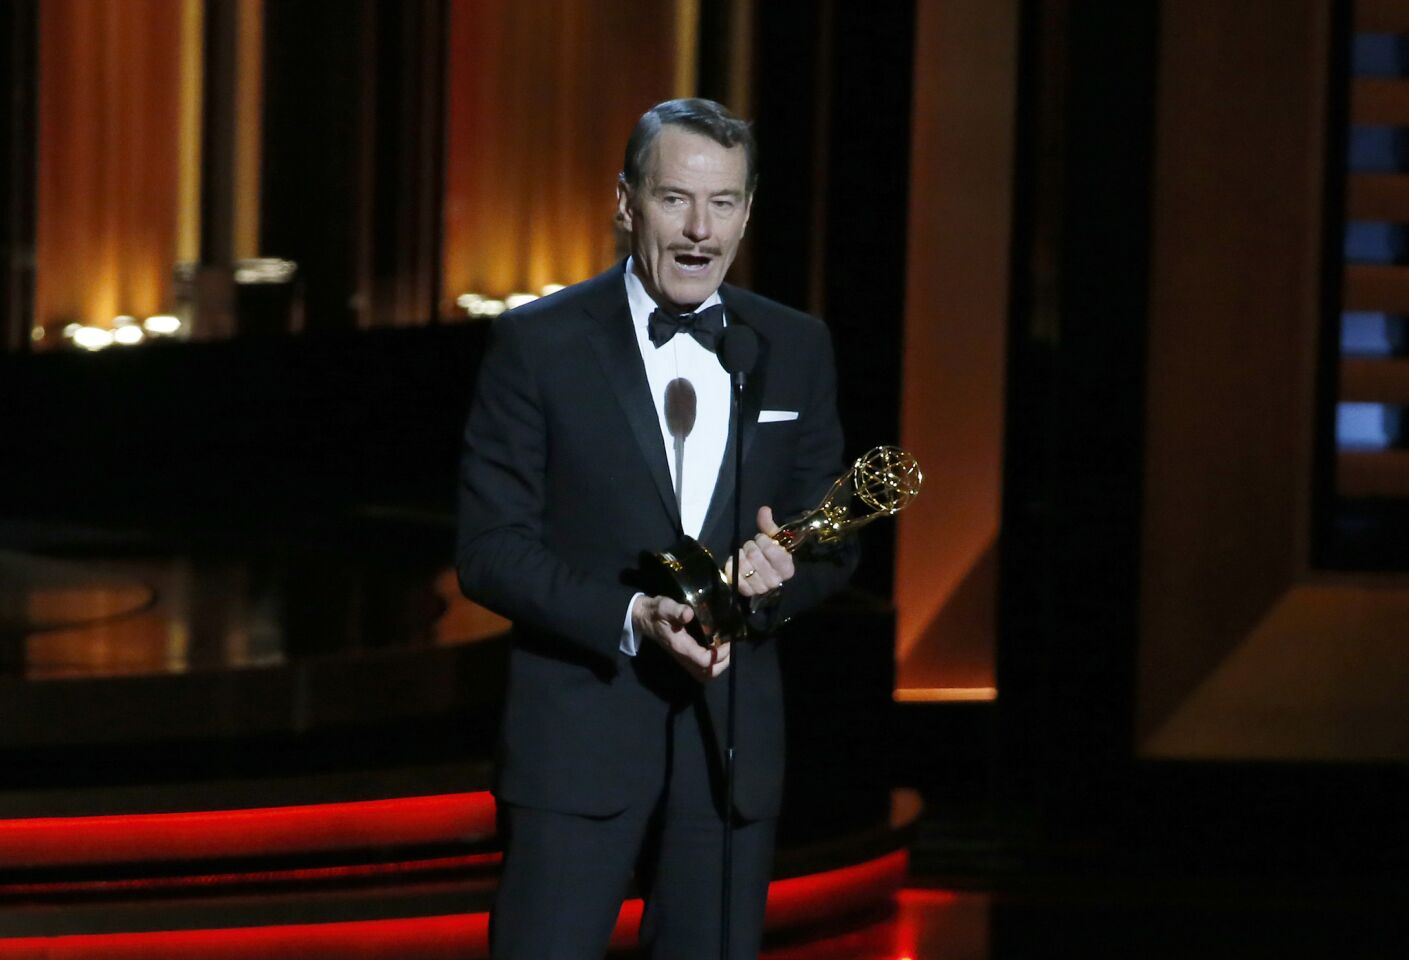 Bryan Cranston of "Breaking Bad" wins the lead actor in a drama, his fifth Emmy win. "I love to act, it is a passion of mine and I will do it until my last breath," Cranston says. He dedicates the award to all the "Sneaky Petes," a nickname his family gave him because of his manipulative ways as a young child.